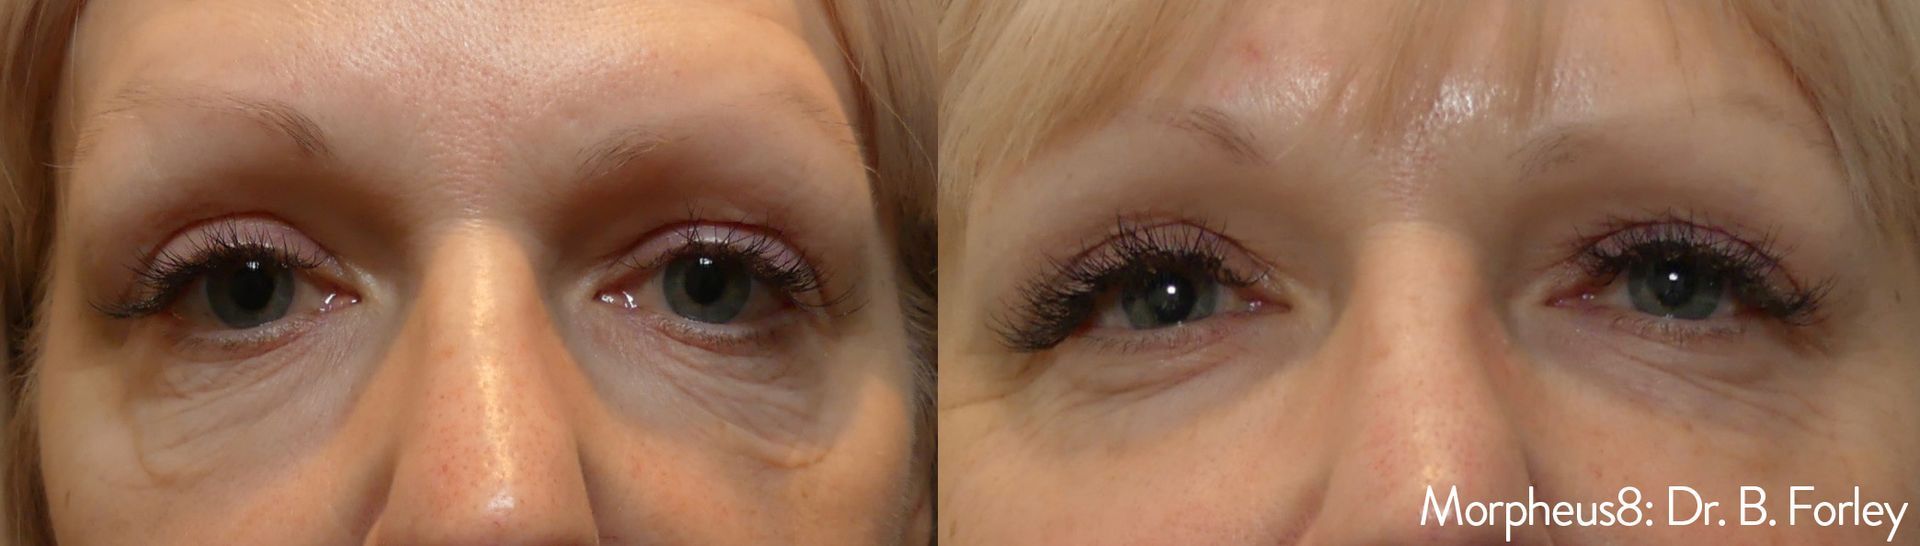 Under eye area before and after Morpheus8 treatments